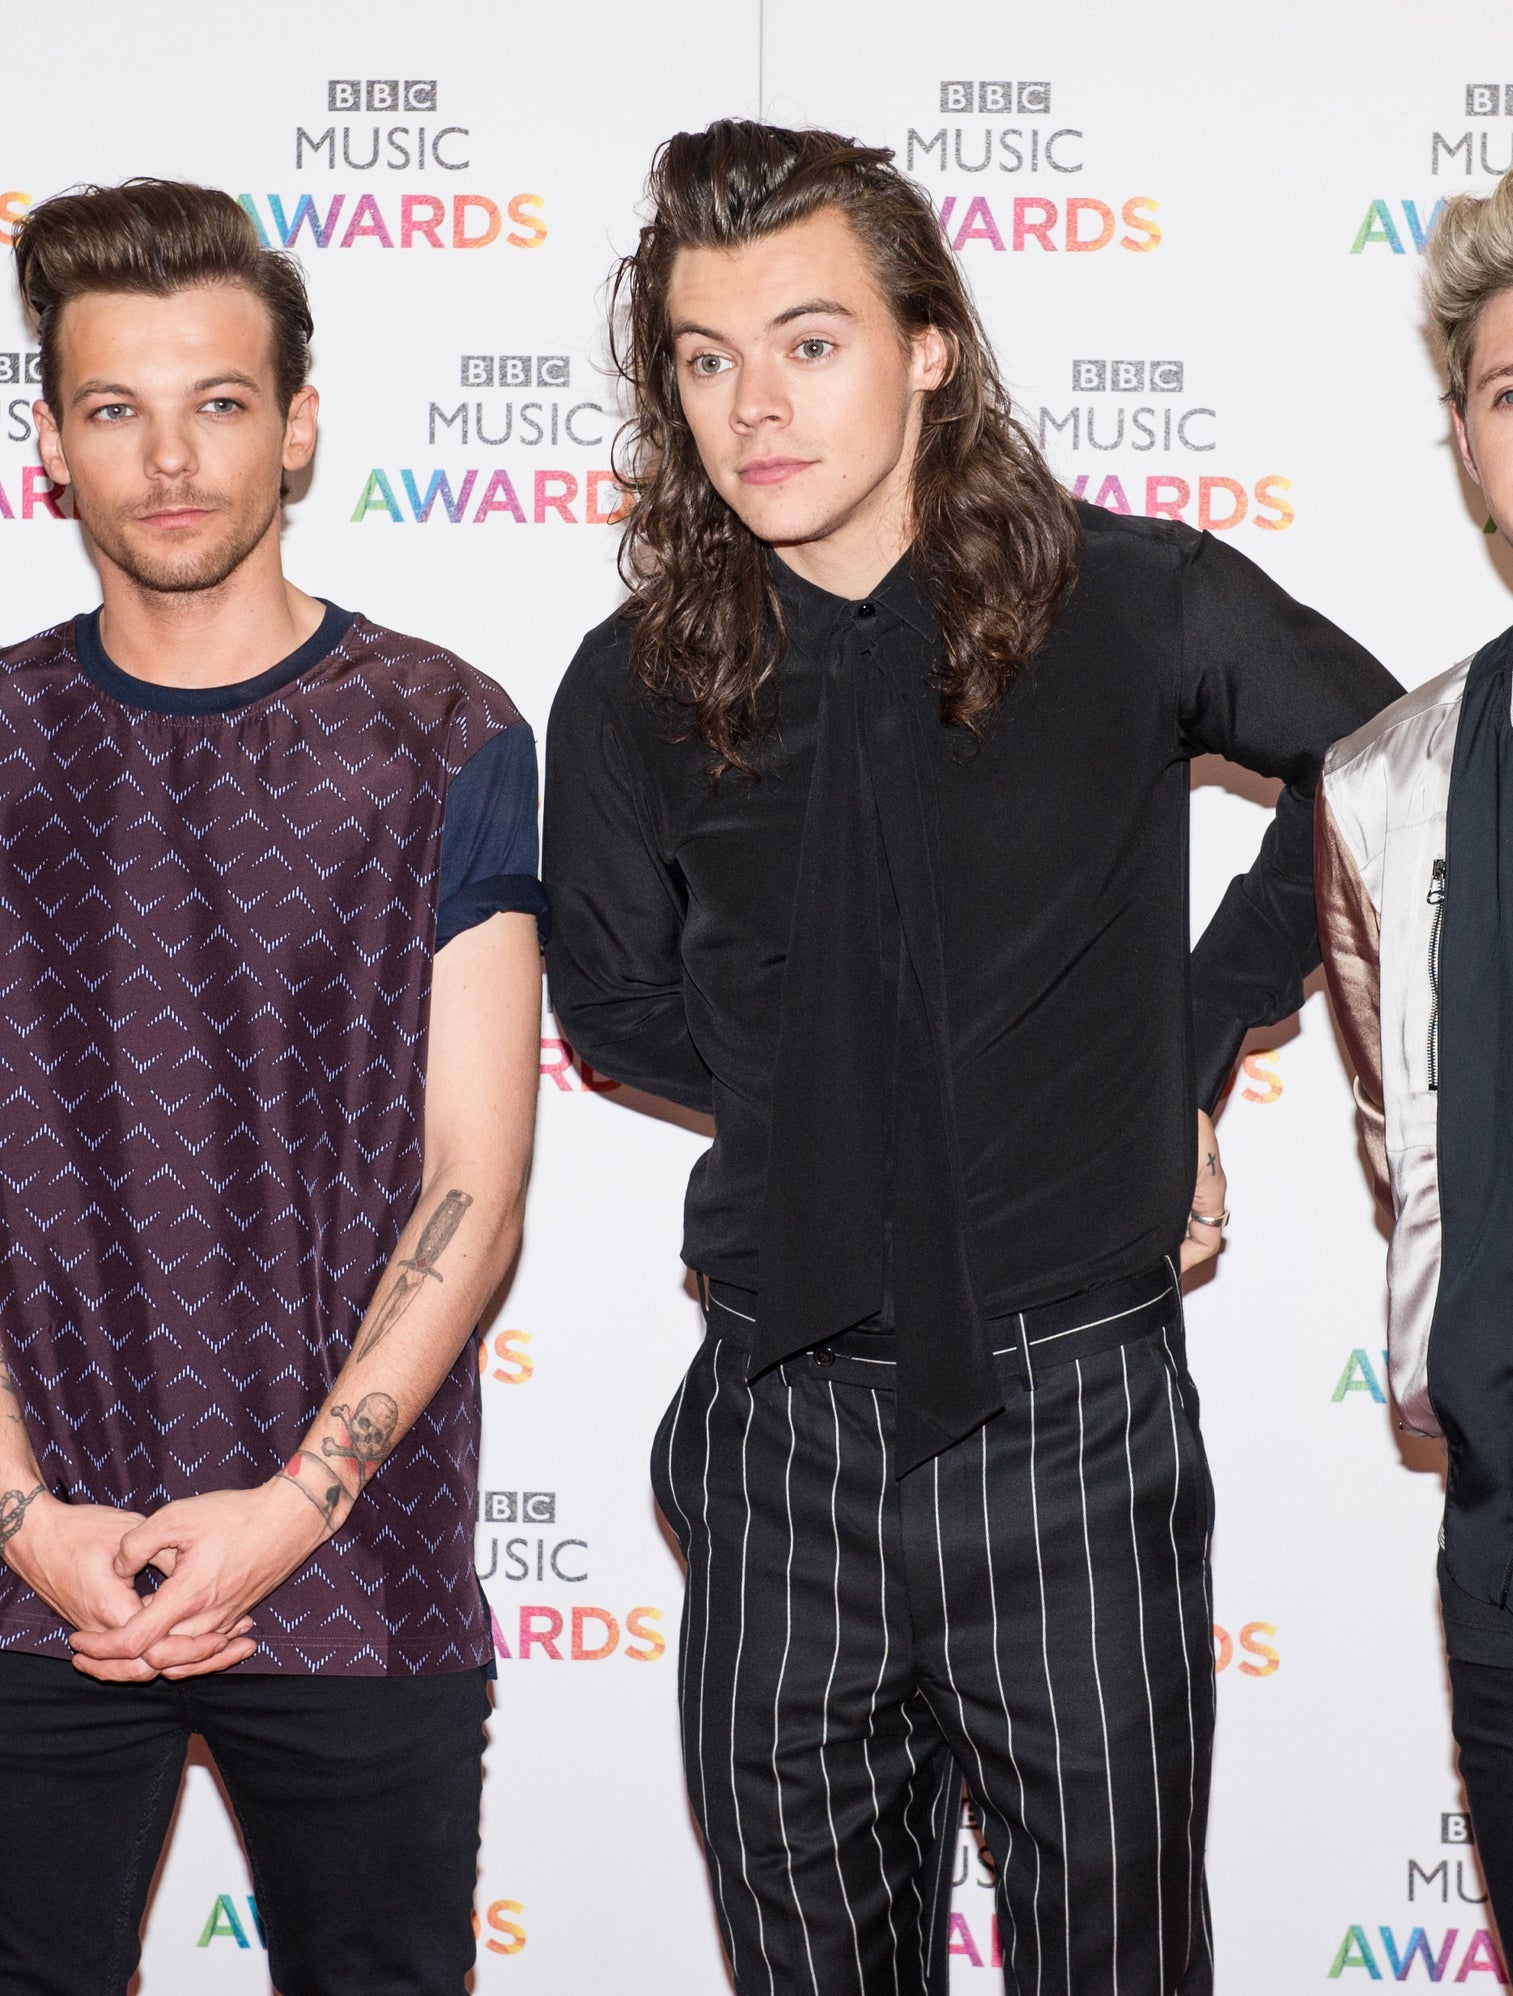 on the red carpet, Harry and Louis stand apart